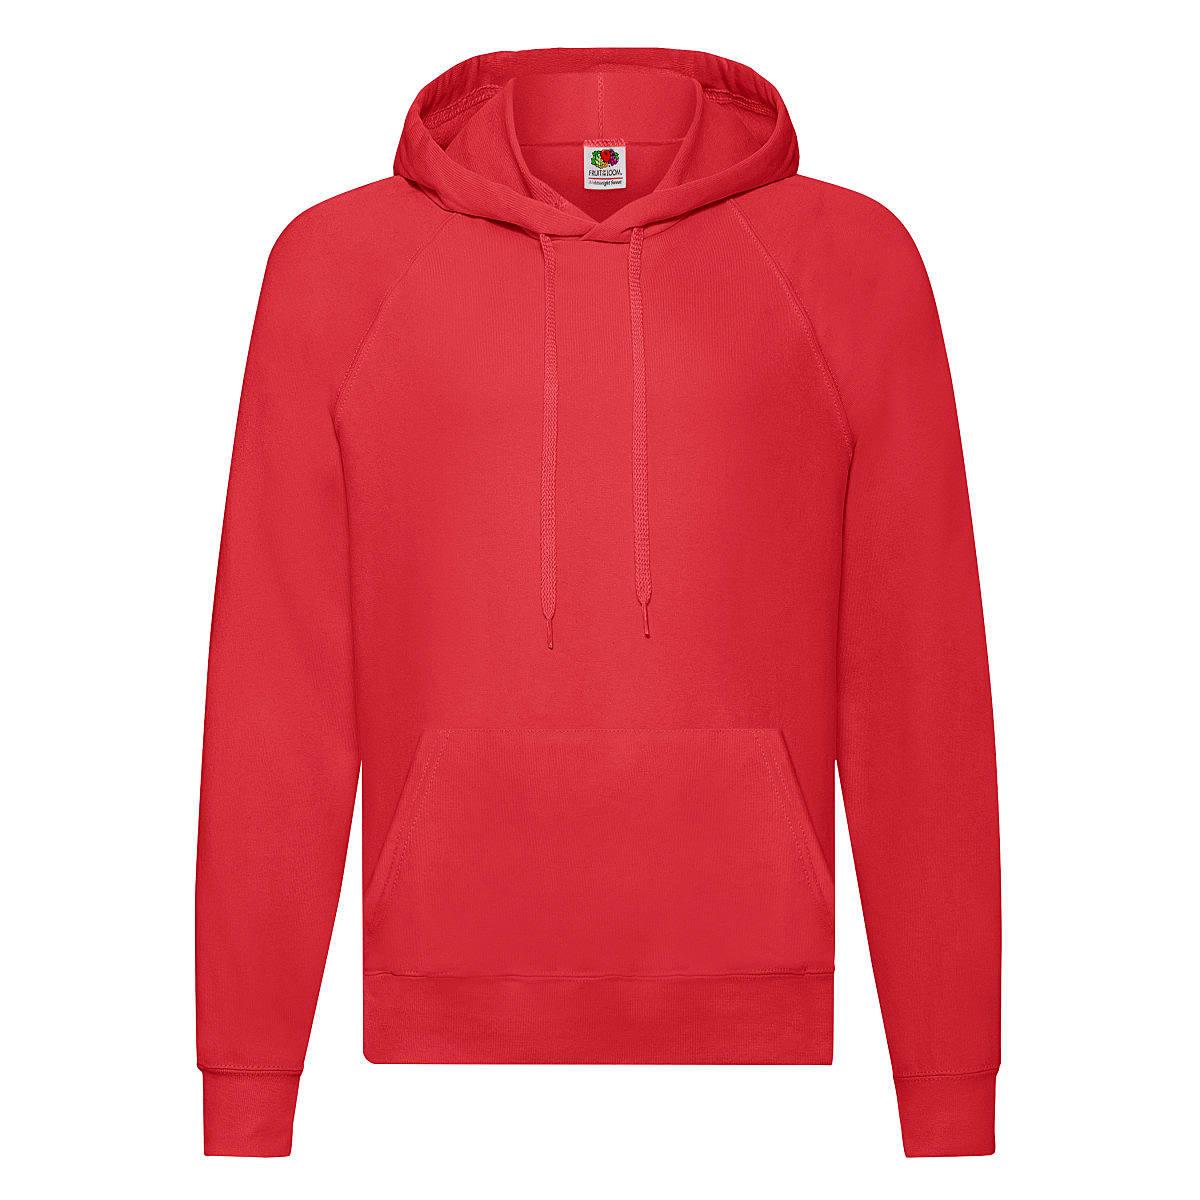 Fruit Of The Loom Mens Lightweight Hoodie in Red (Product Code: 62140)